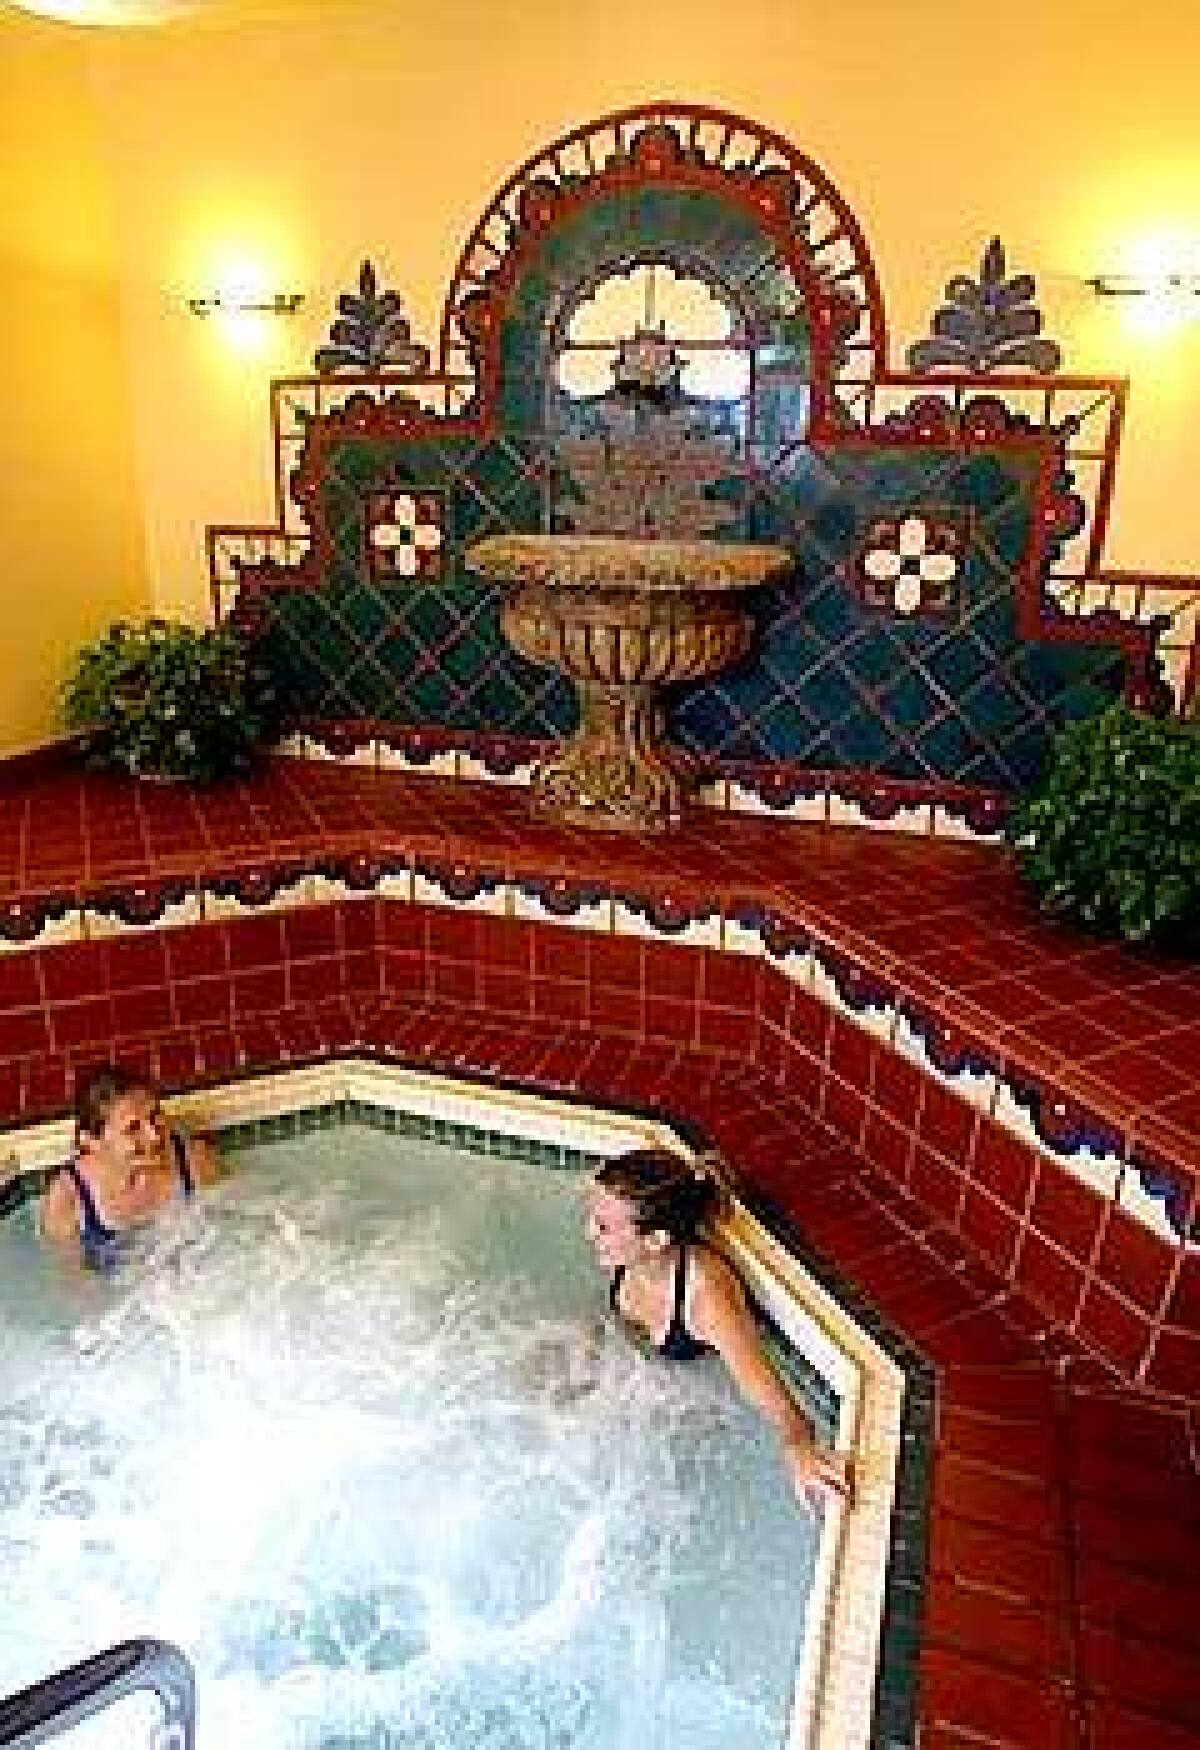 Judy Blades, left, and her daughter Lisa relax in the Oaks whirlpool room, which has new retro-Spanish tile.